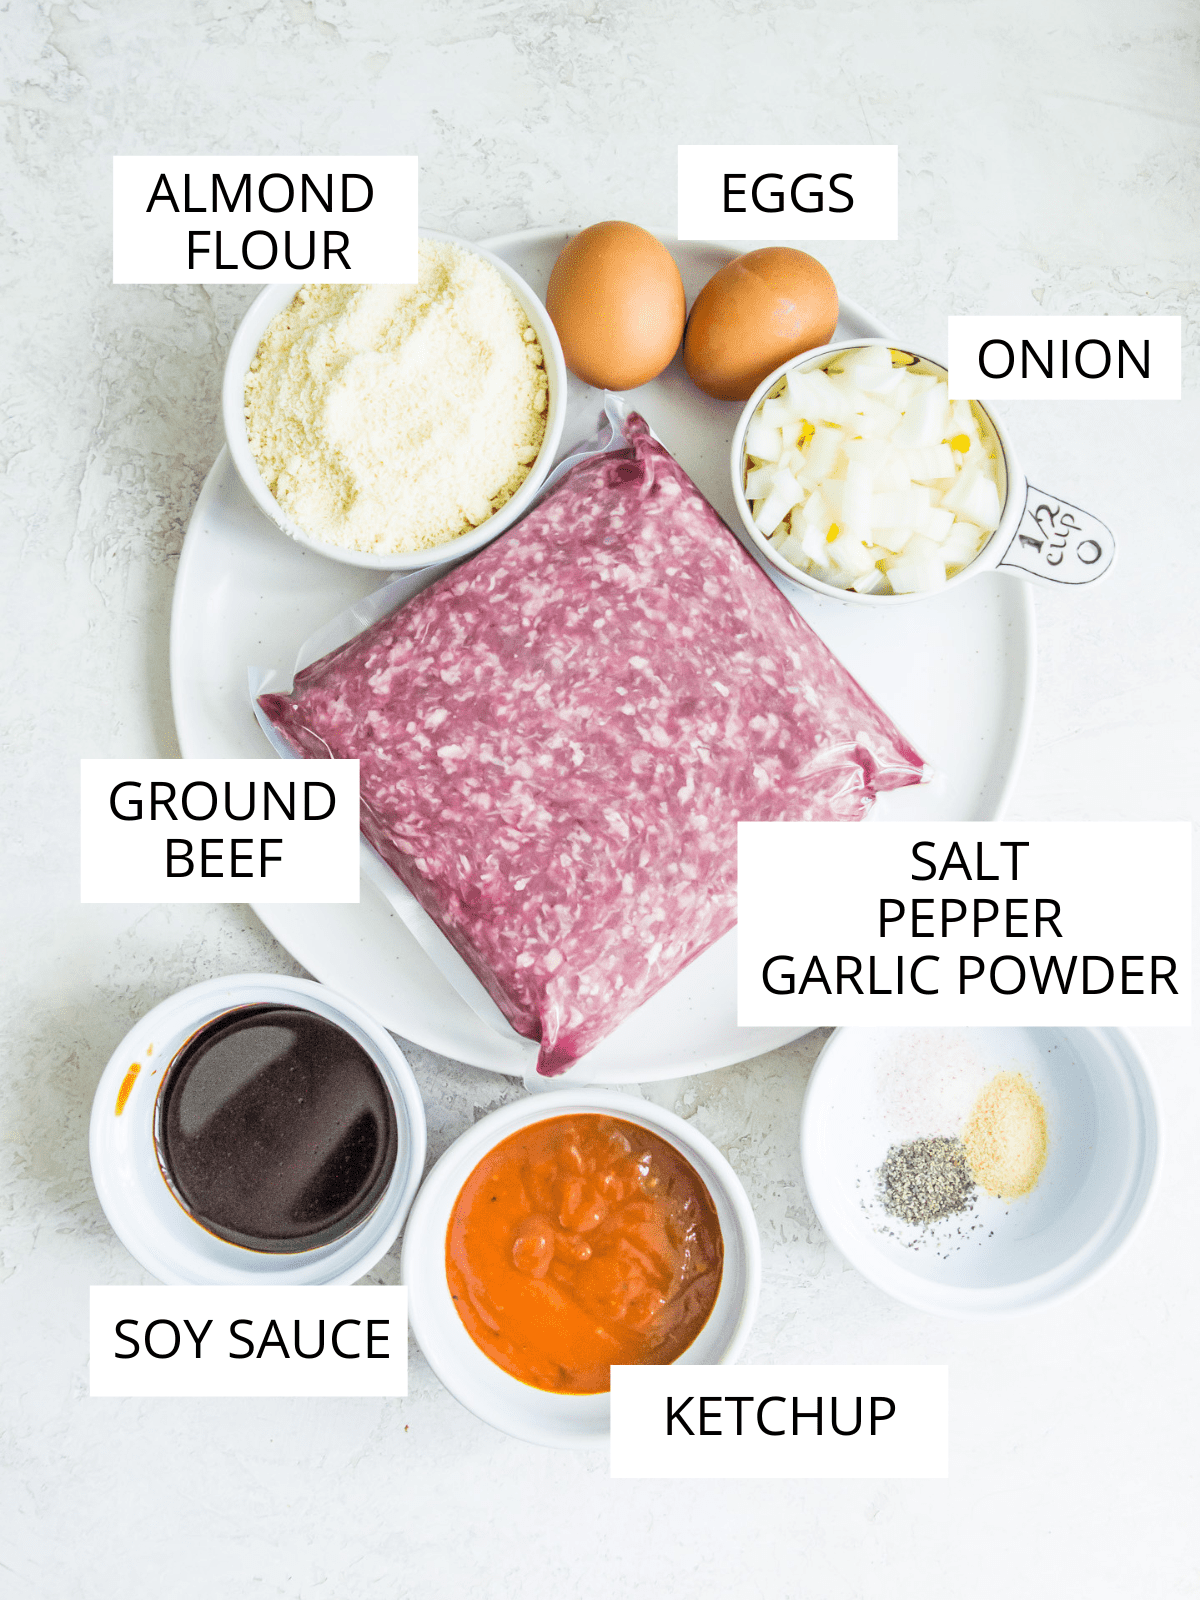 The ingredients needed for making gluten free burgers in small bowls and plates.